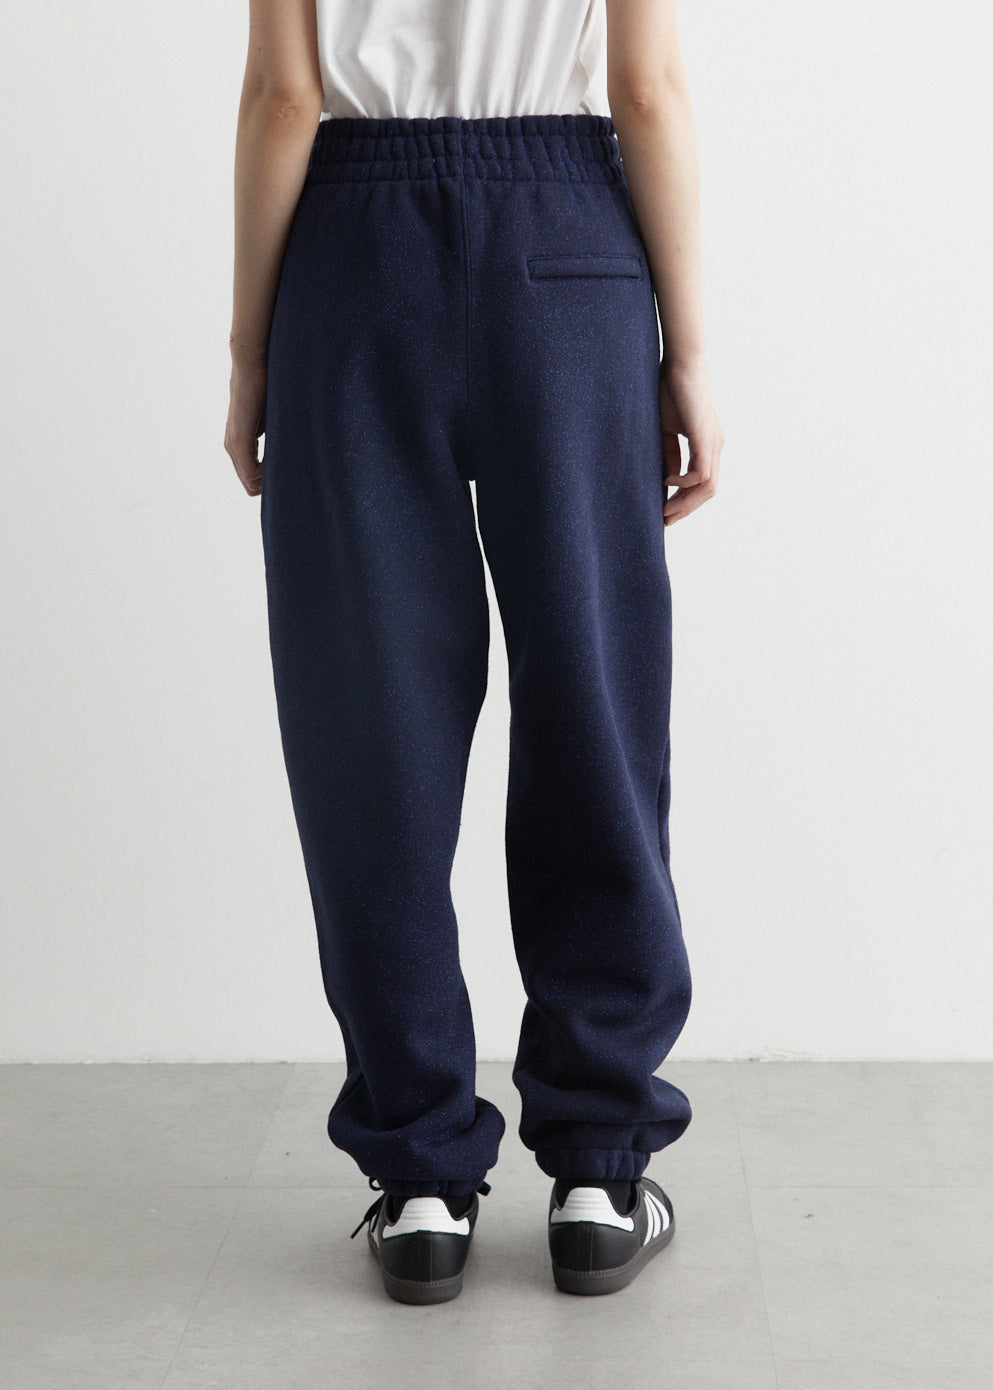 T By Alexander Wang - Glitter Terry Sweatpants  HBX - Globally Curated  Fashion and Lifestyle by Hypebeast